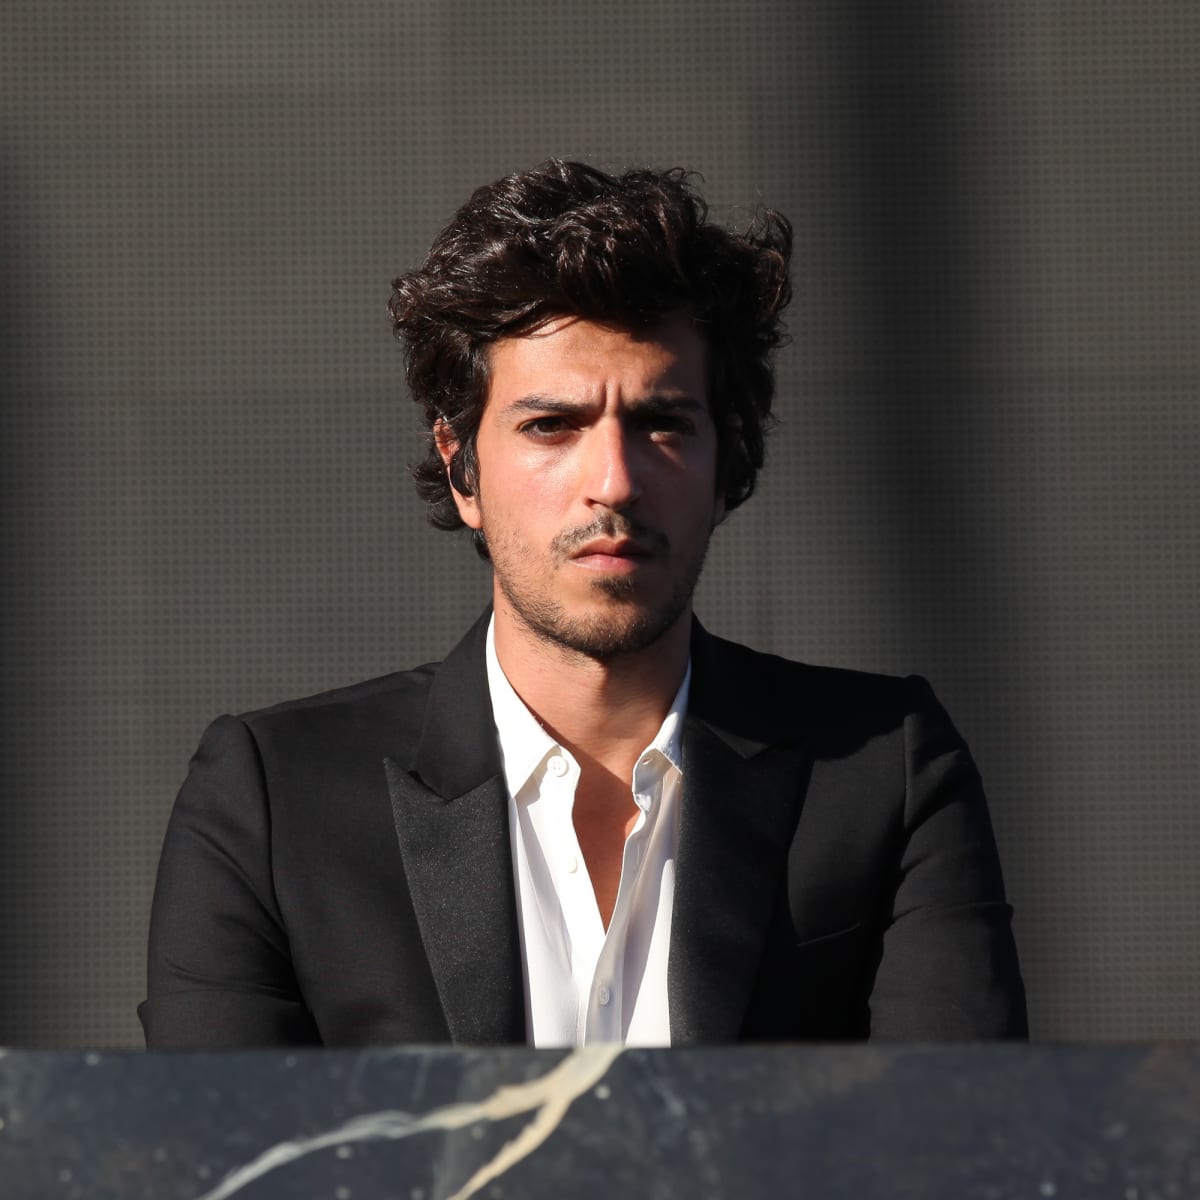 LISTEN] Gesaffelstein Releases Epic Live Recording from 2019 Requiem Tour Stop in Los Angeles - EDM.com - The Latest Electronic Dance Music News, Reviews & Artists